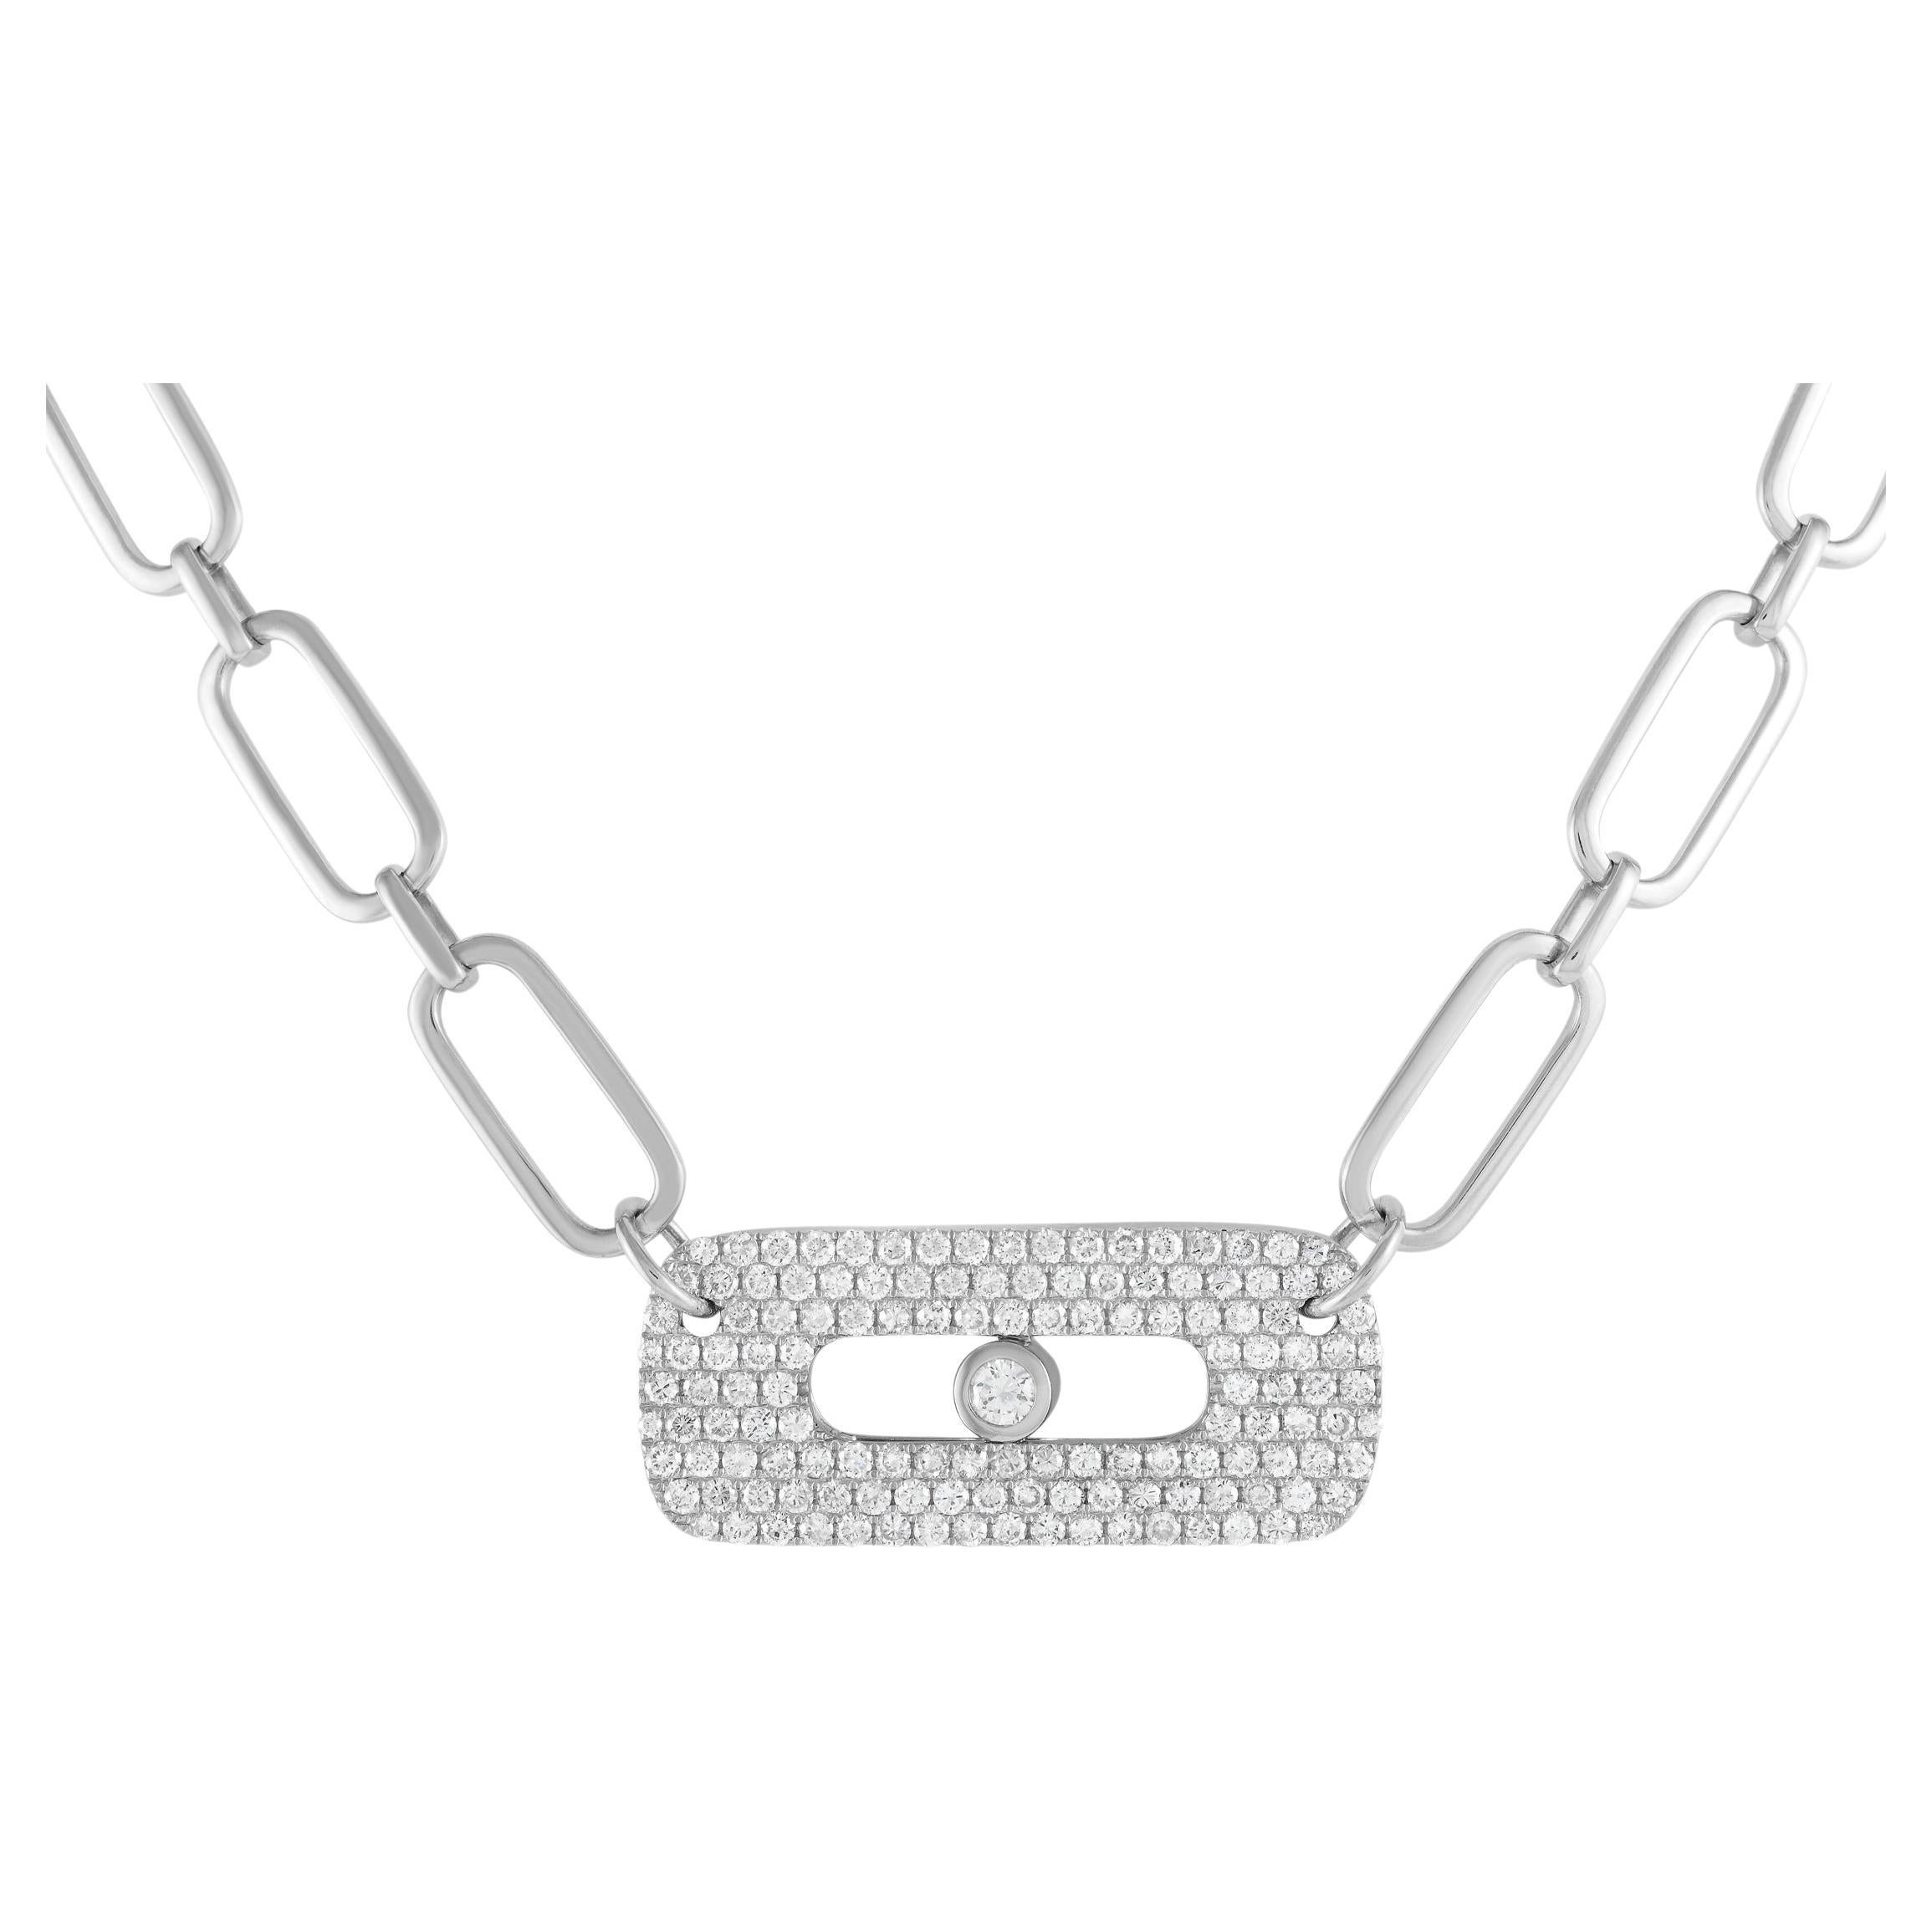 LB Exclusive 18K White Gold 3.0ct Diamond Link Necklace For Sale